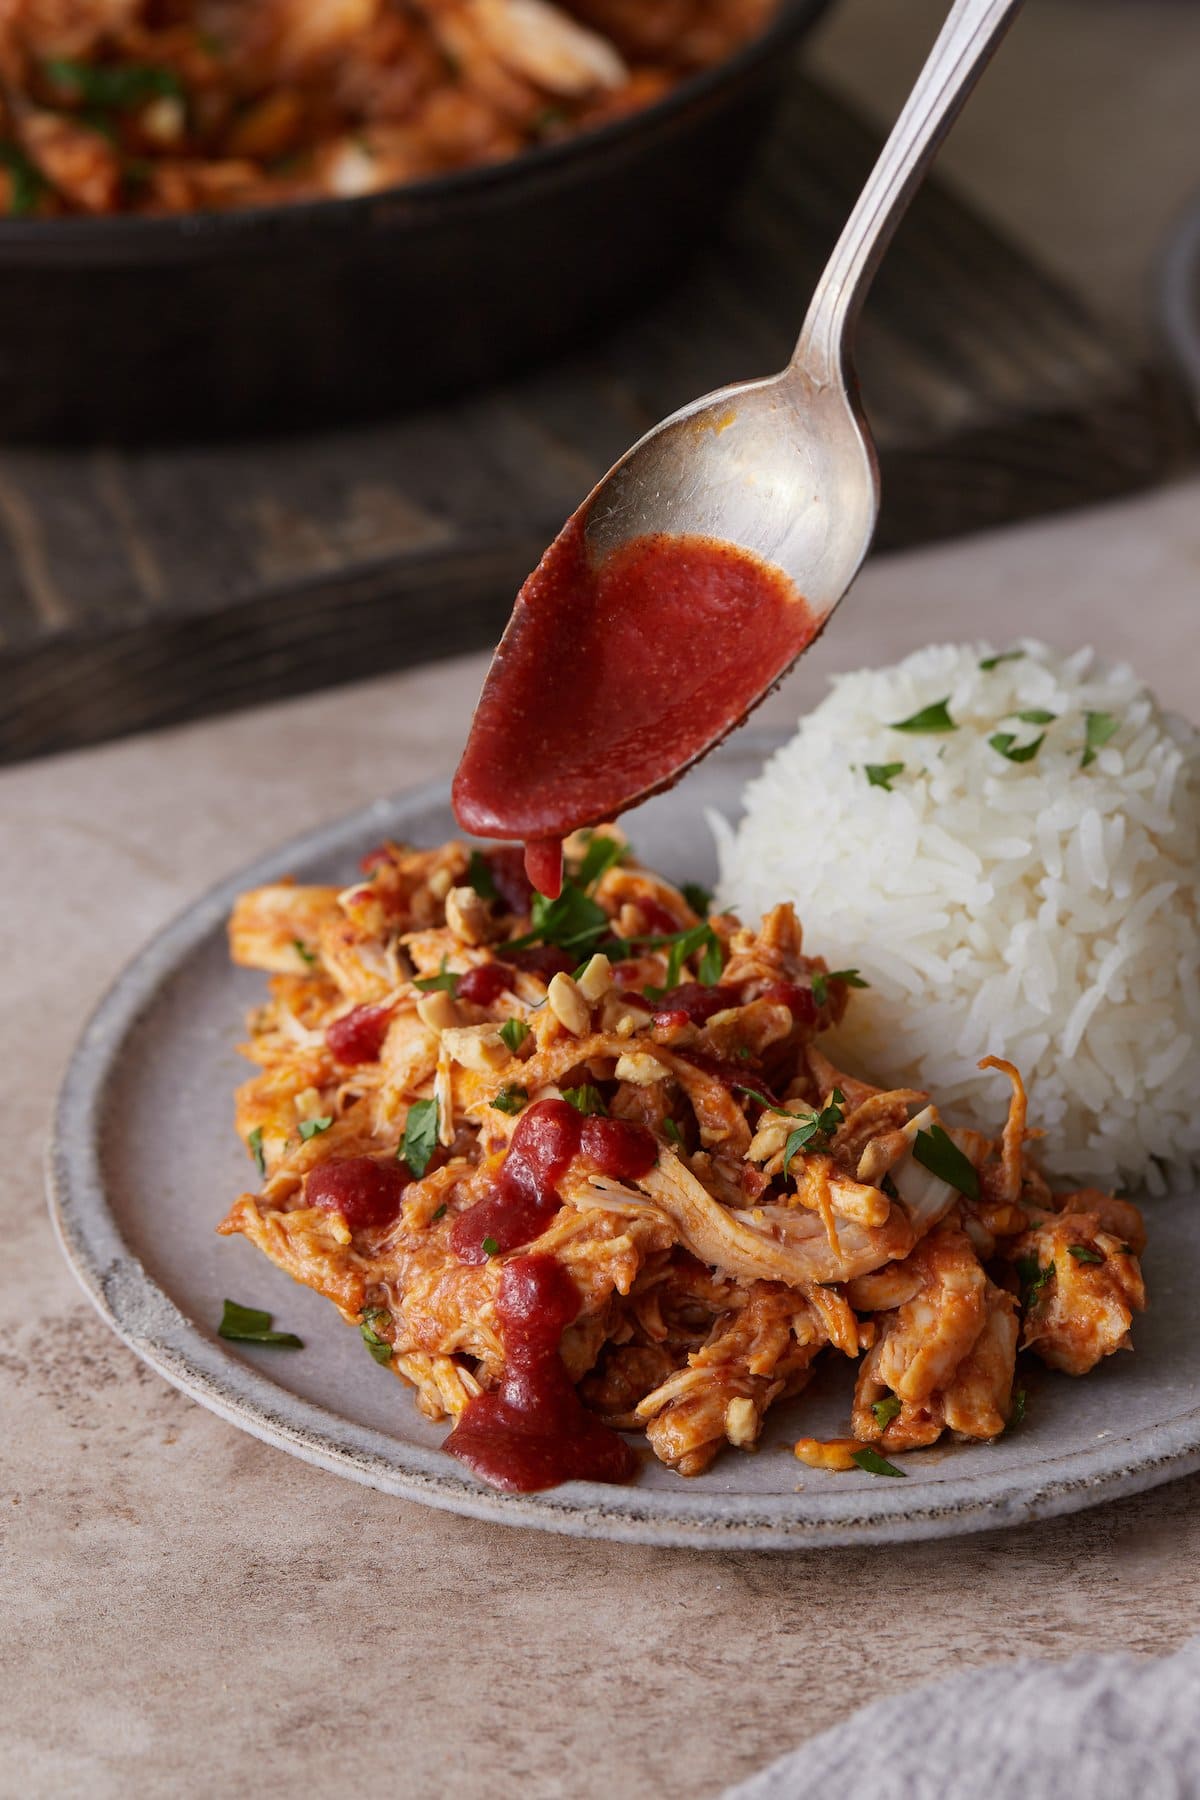 Hot sauce is drizzled over a plate of Thai-style slow cooker chicken.